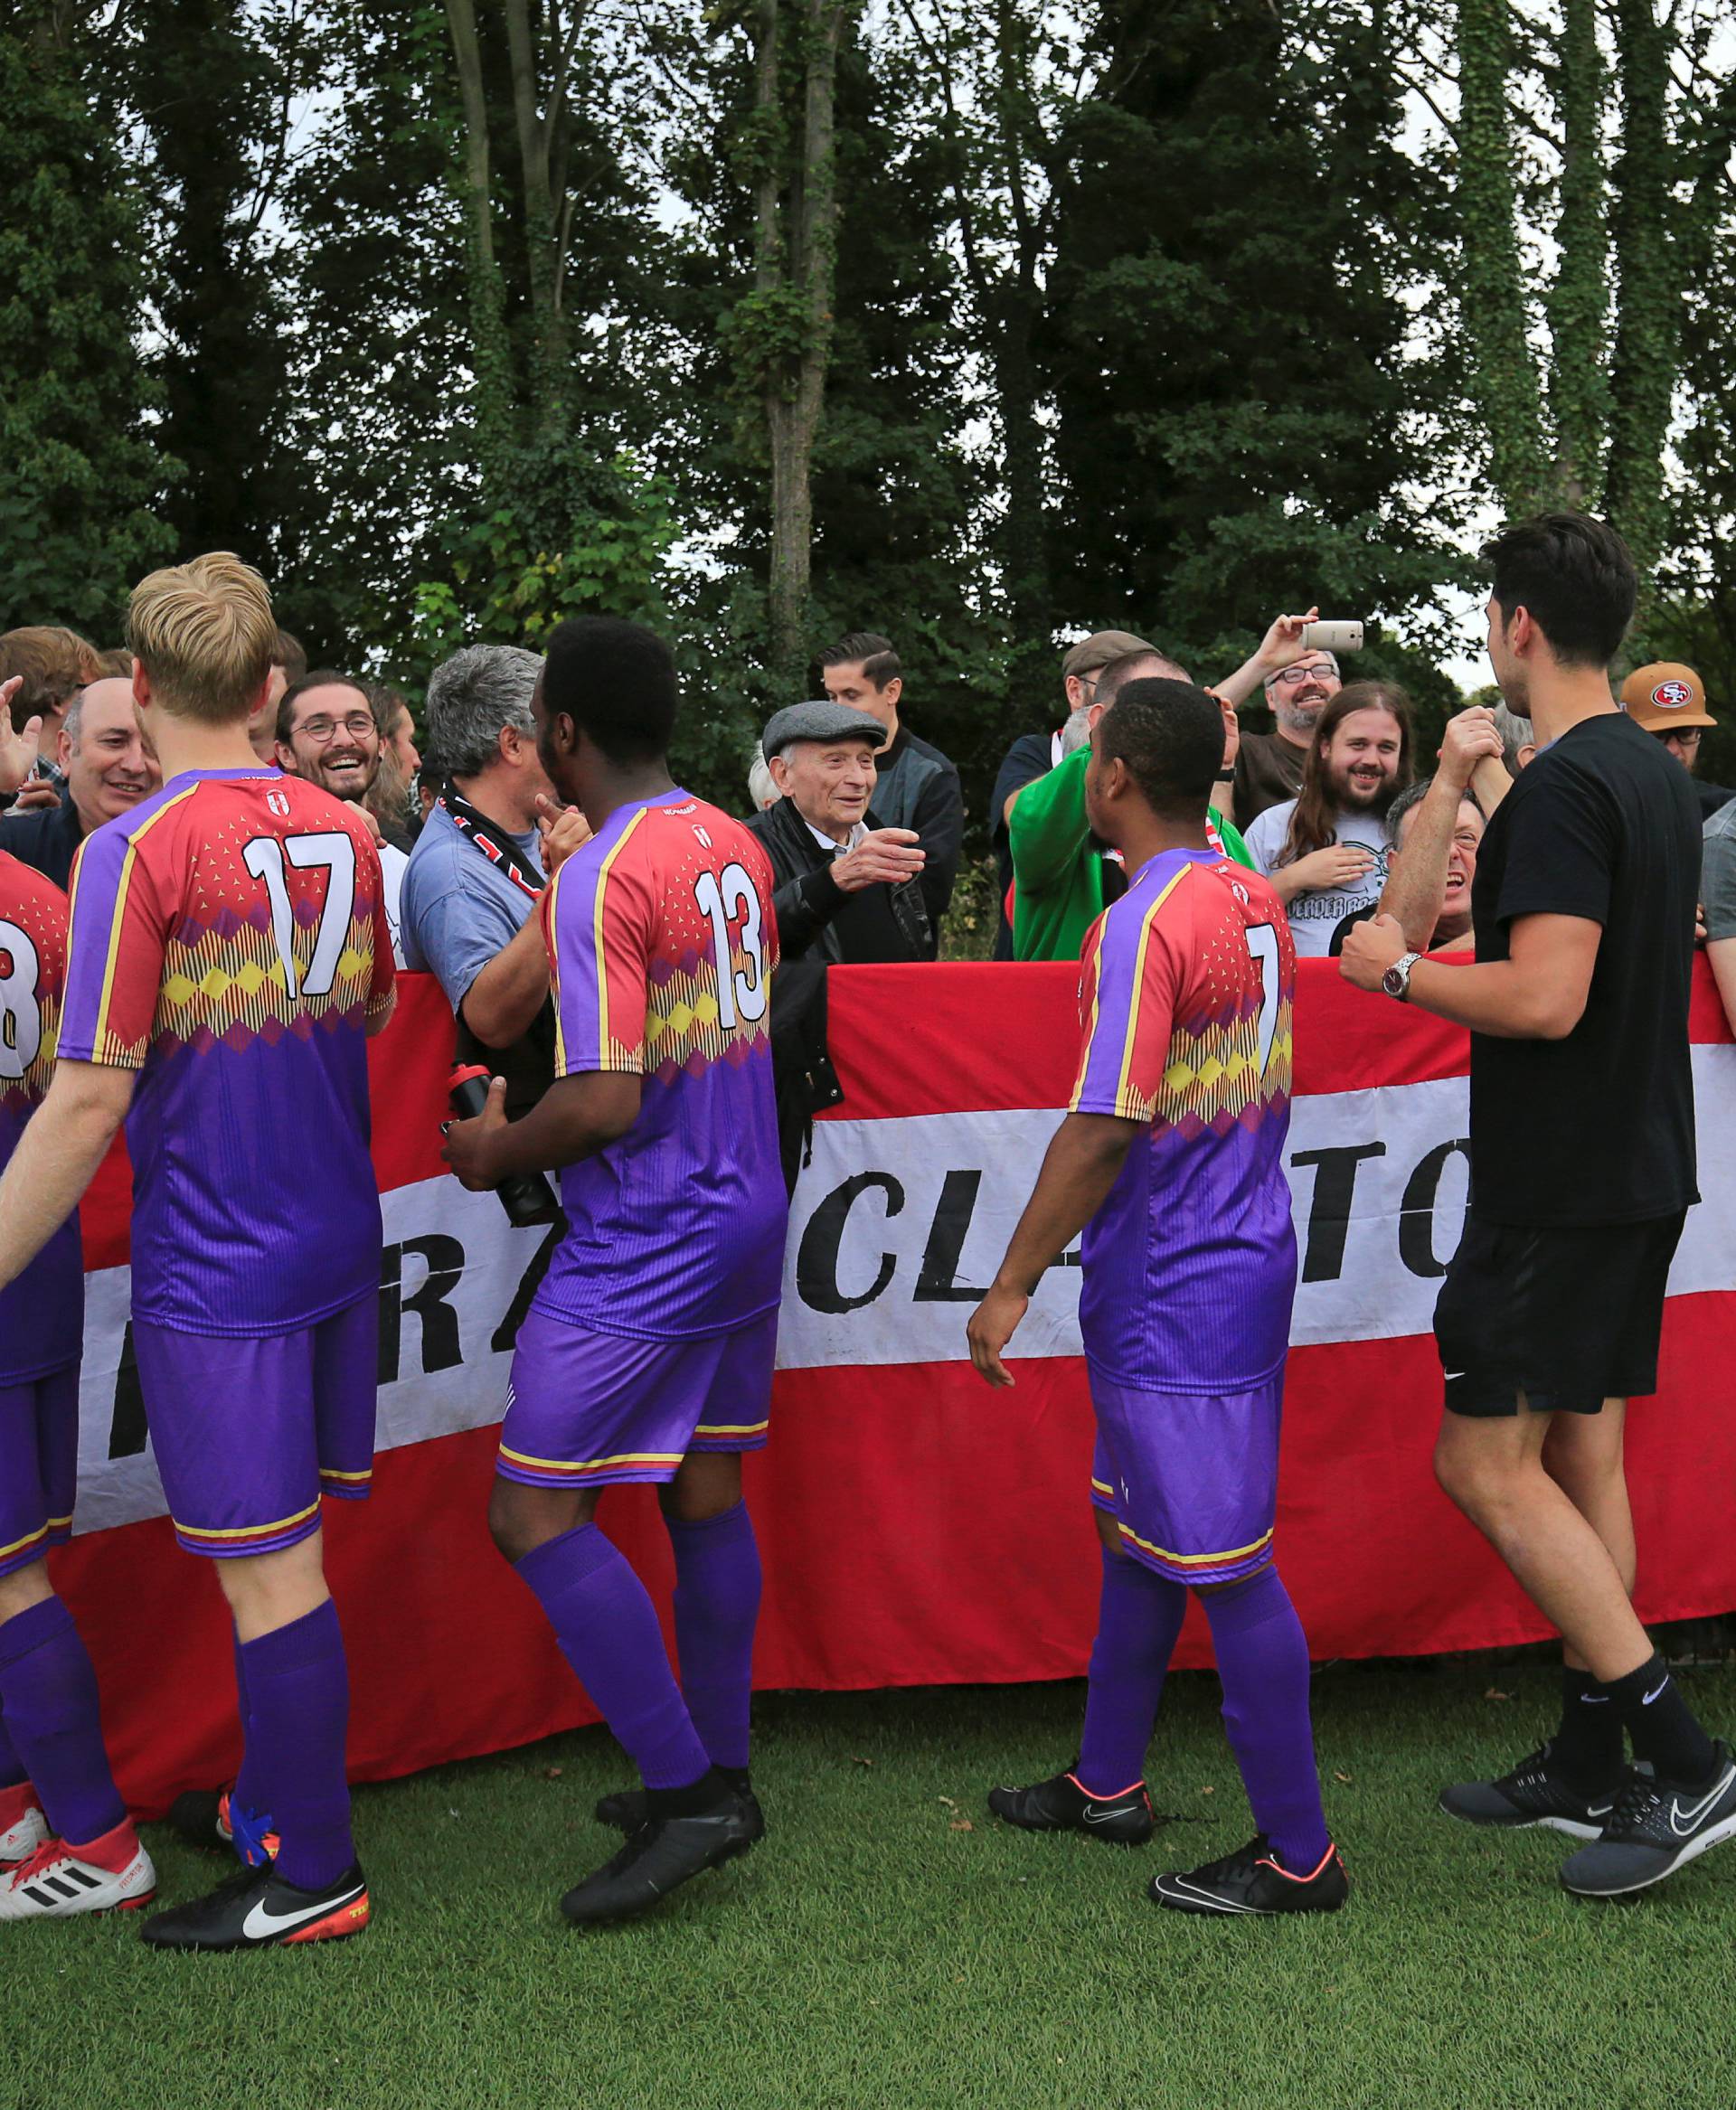 Clapton CFC players shake hands with their supporters after winning 2-0 away game against Healing Town in East Acton, in London